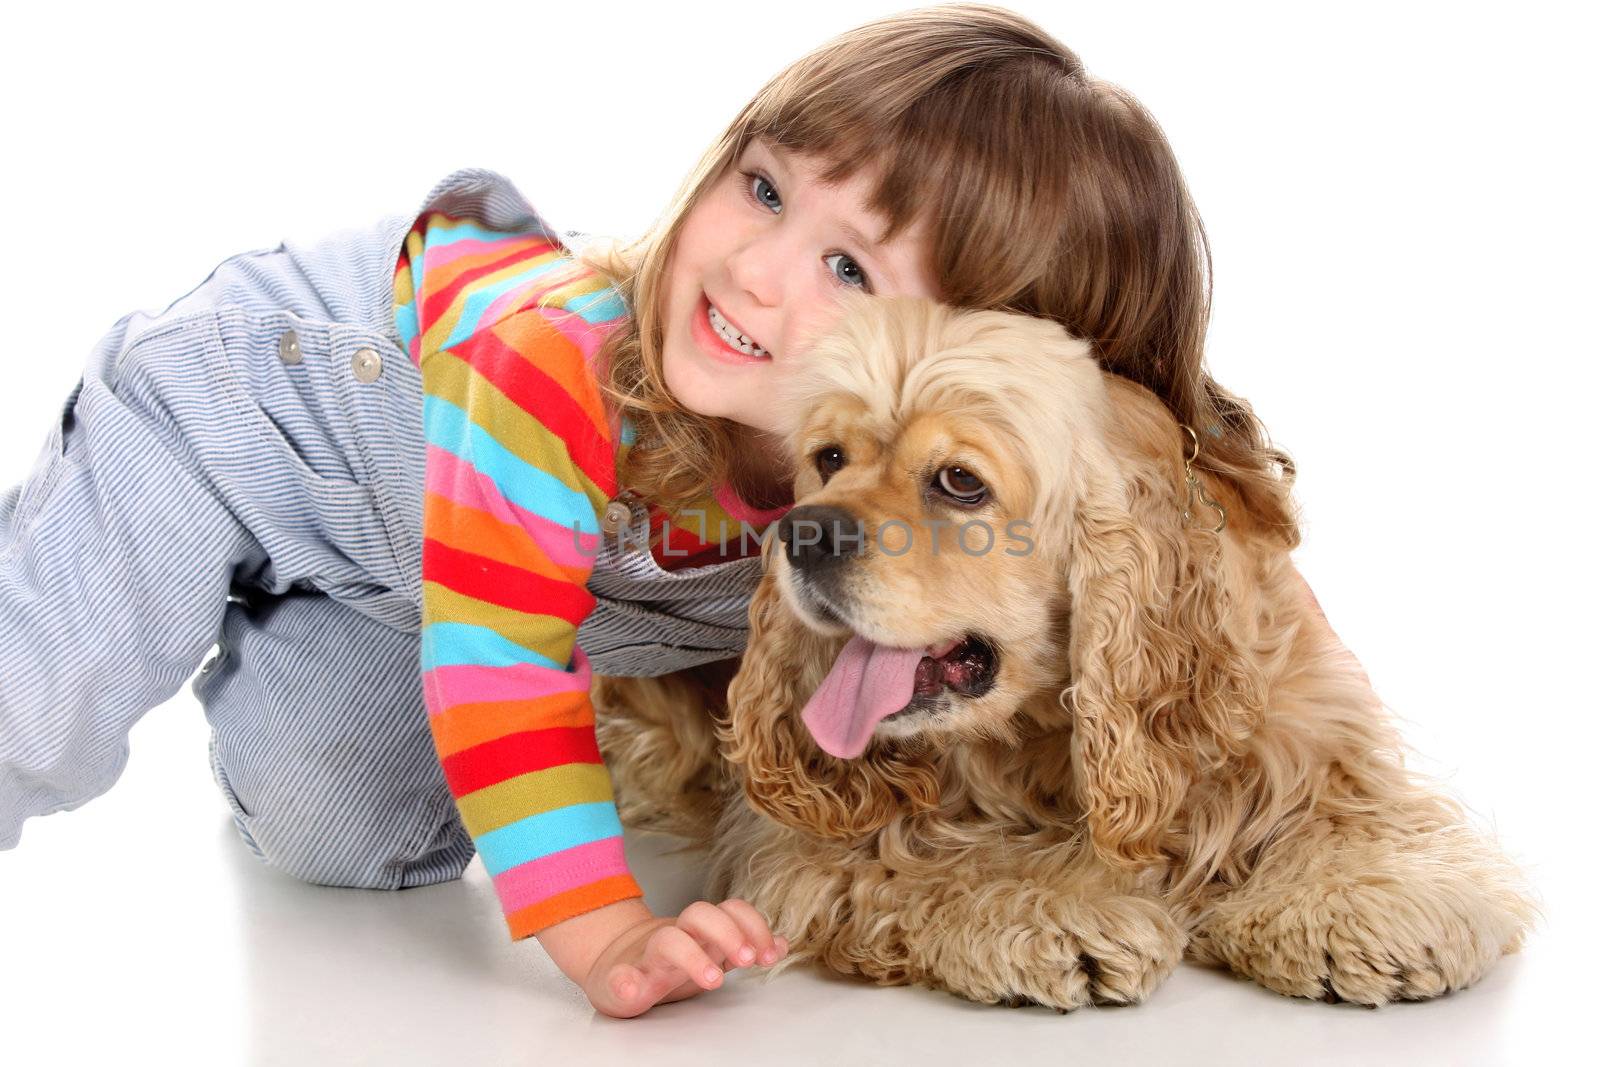 beauty a little girl and American Cocker Spaniel